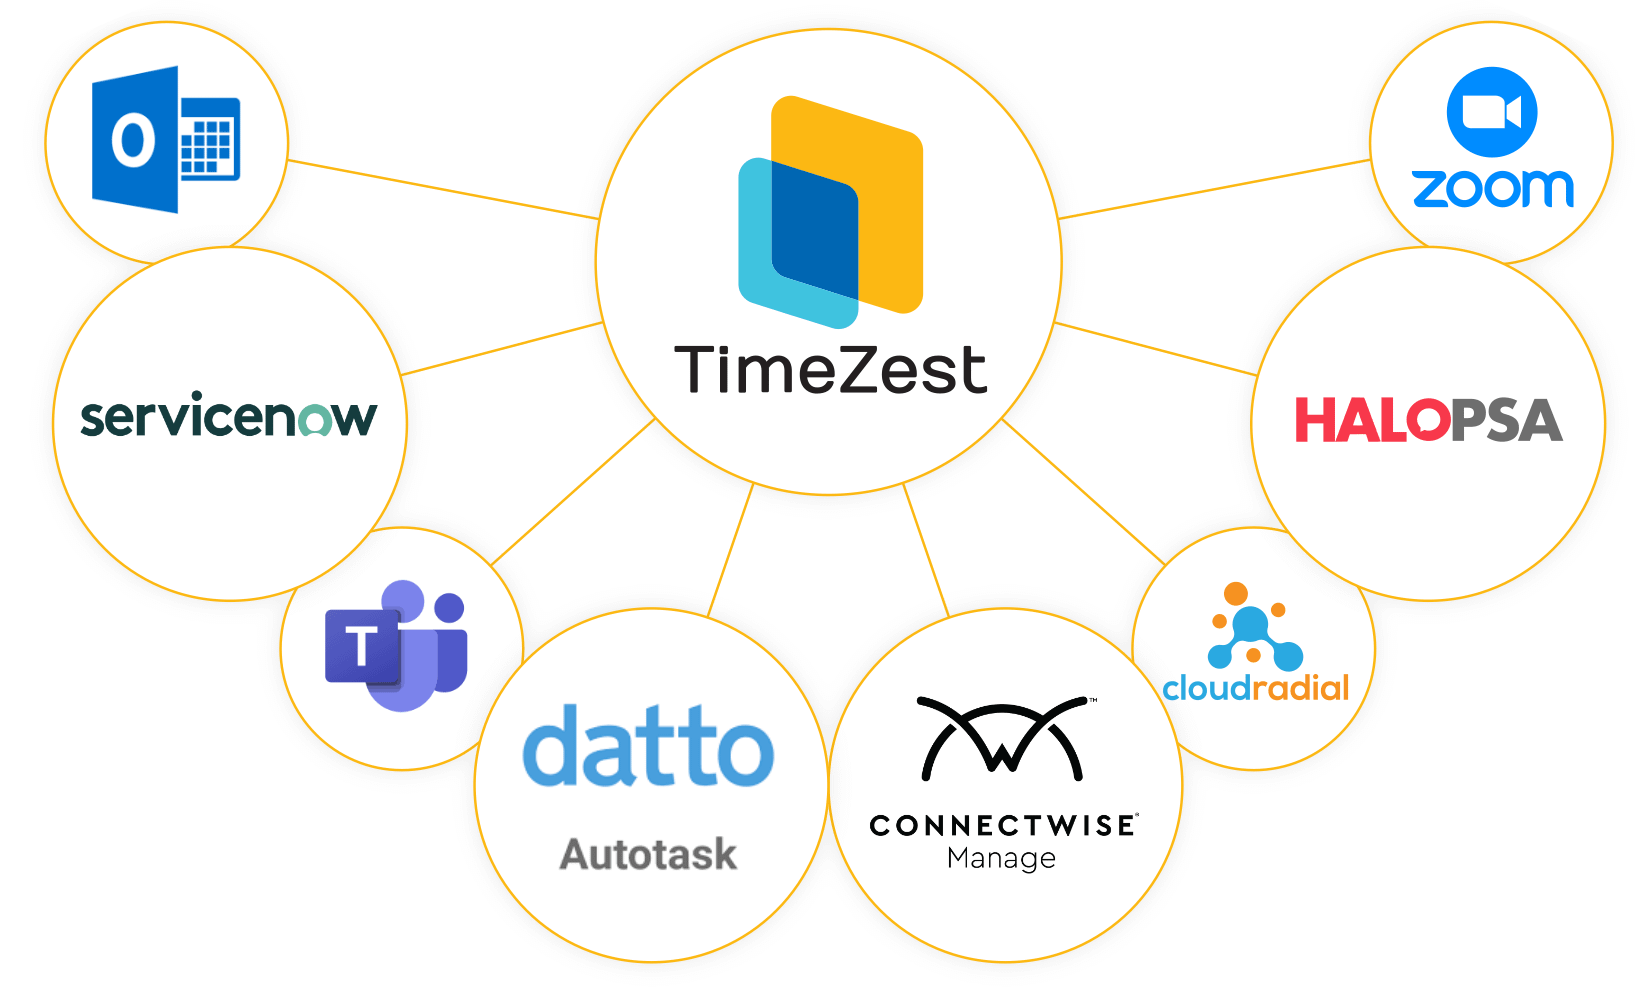 Showing TimeZest's integrations with Connectwise, Autotask, HaloPSA, CloudRadial, and Outlook.